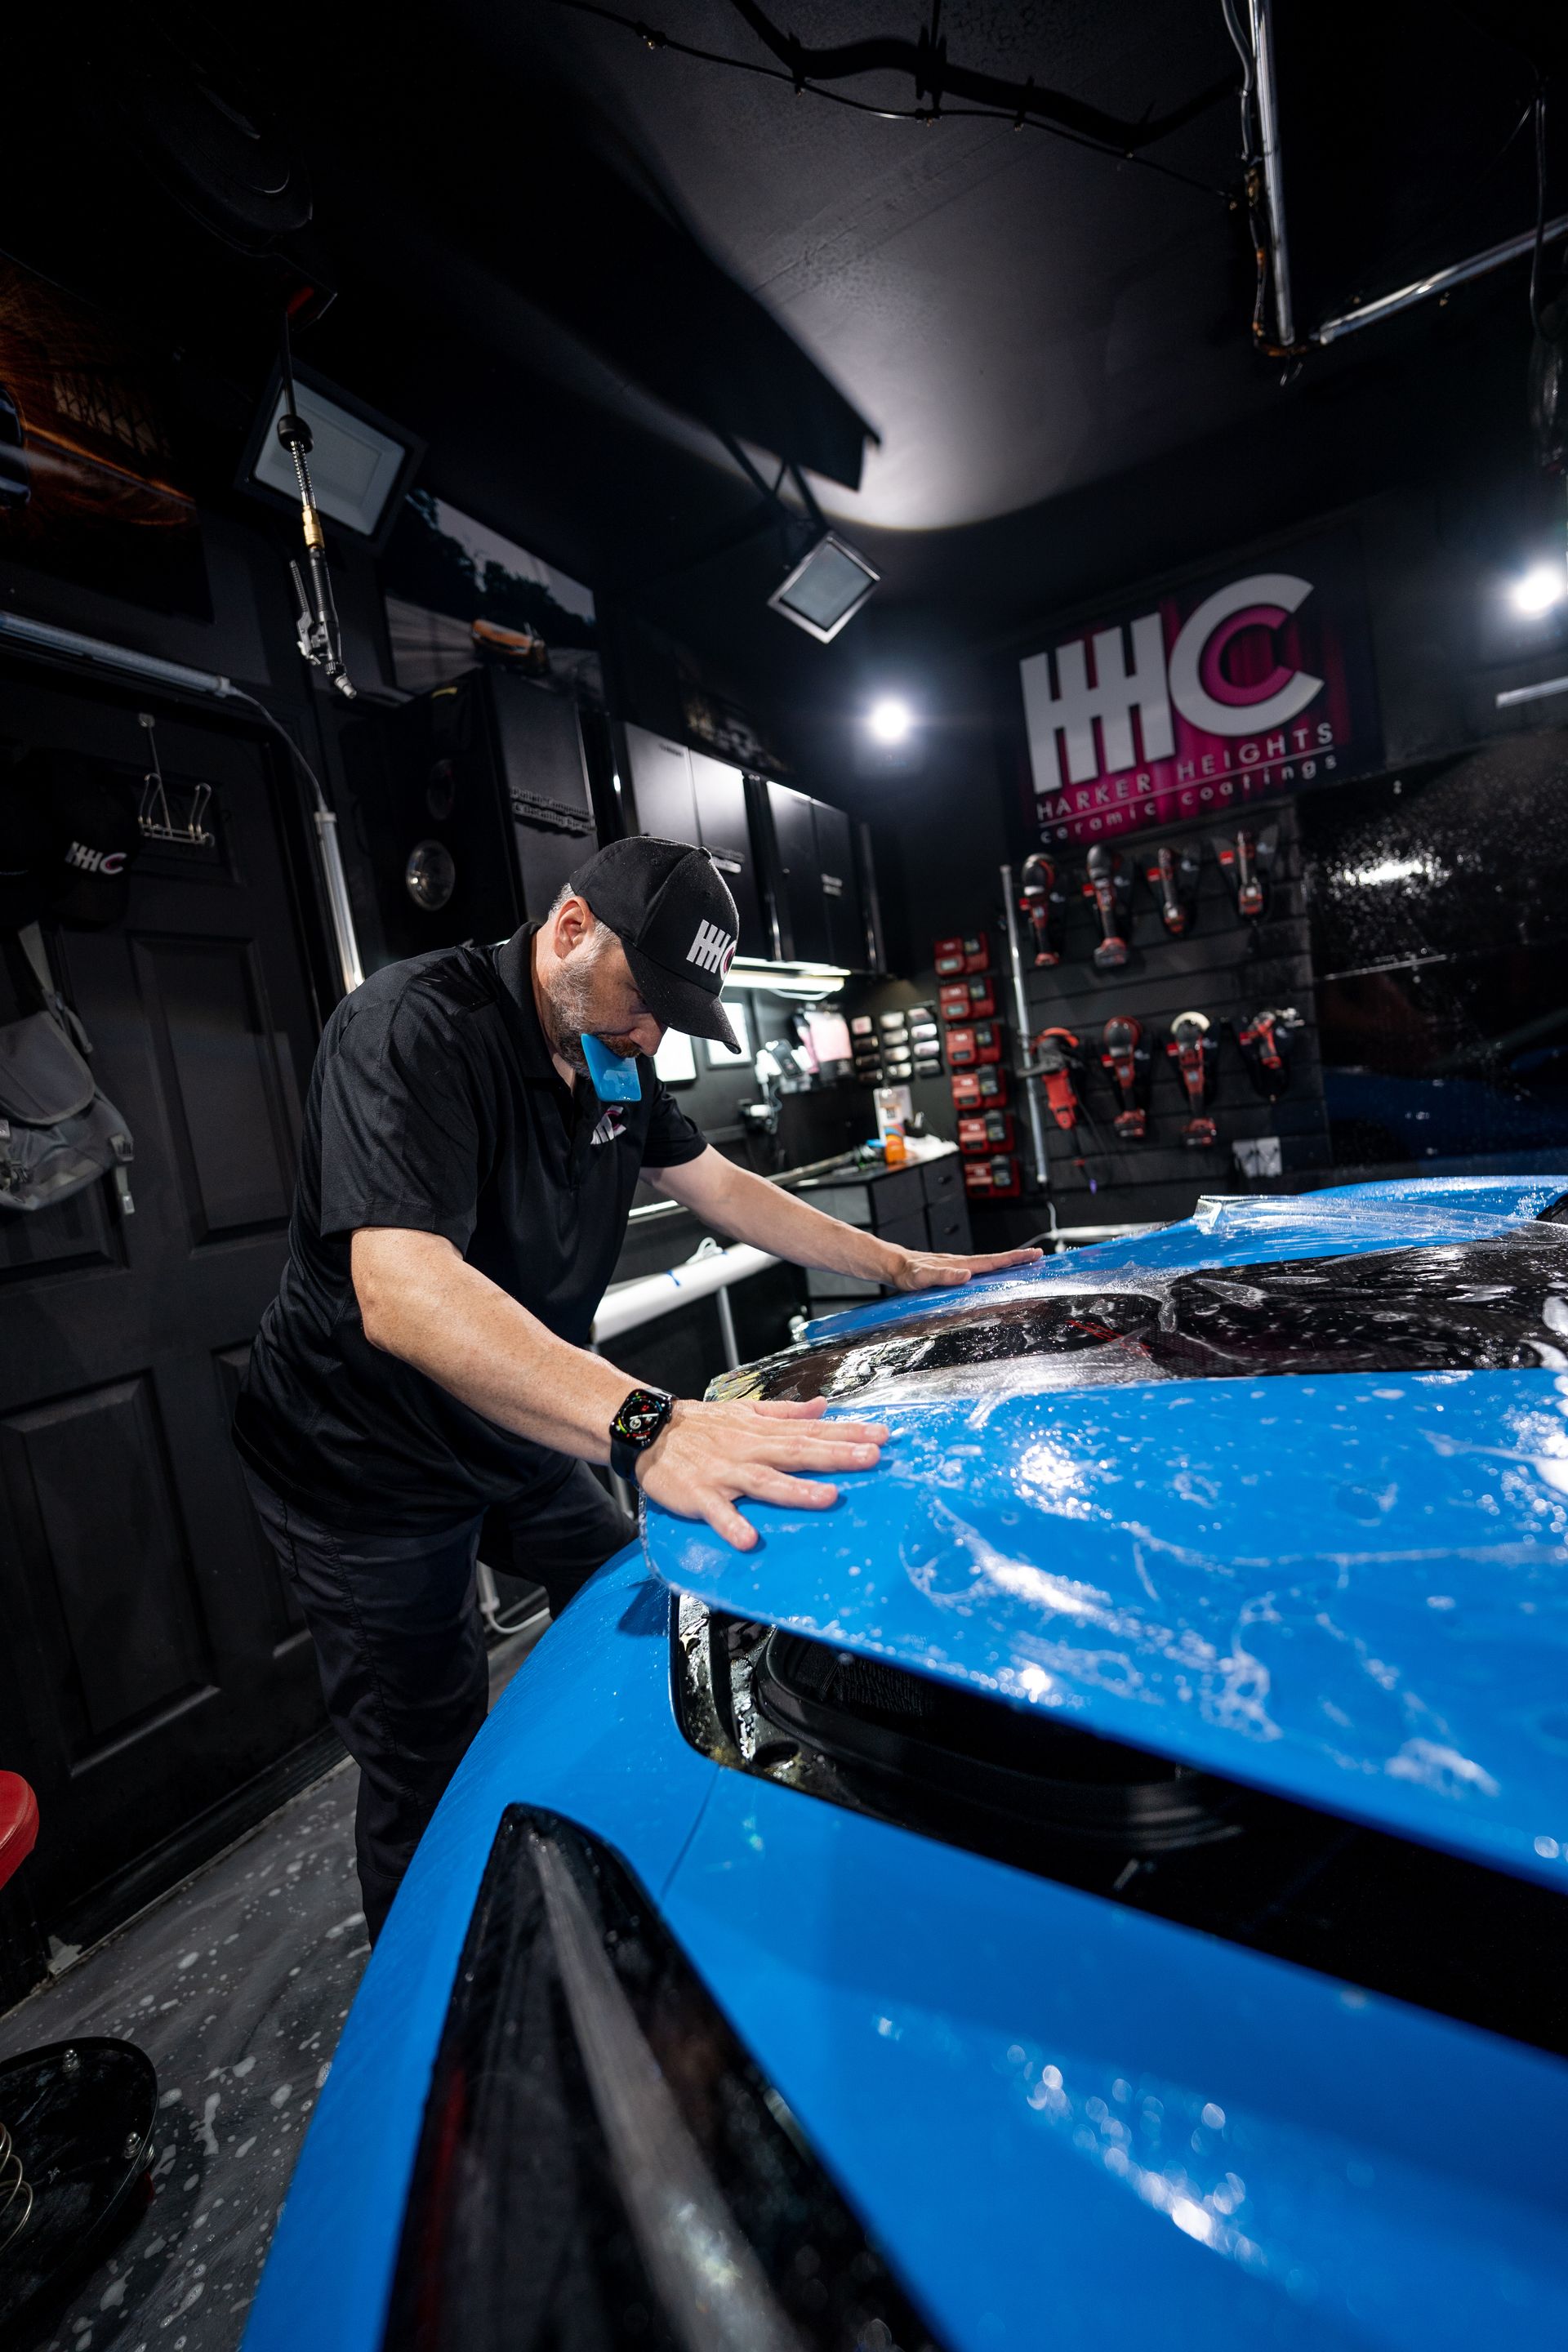 A man is working on a blue car in a garage.